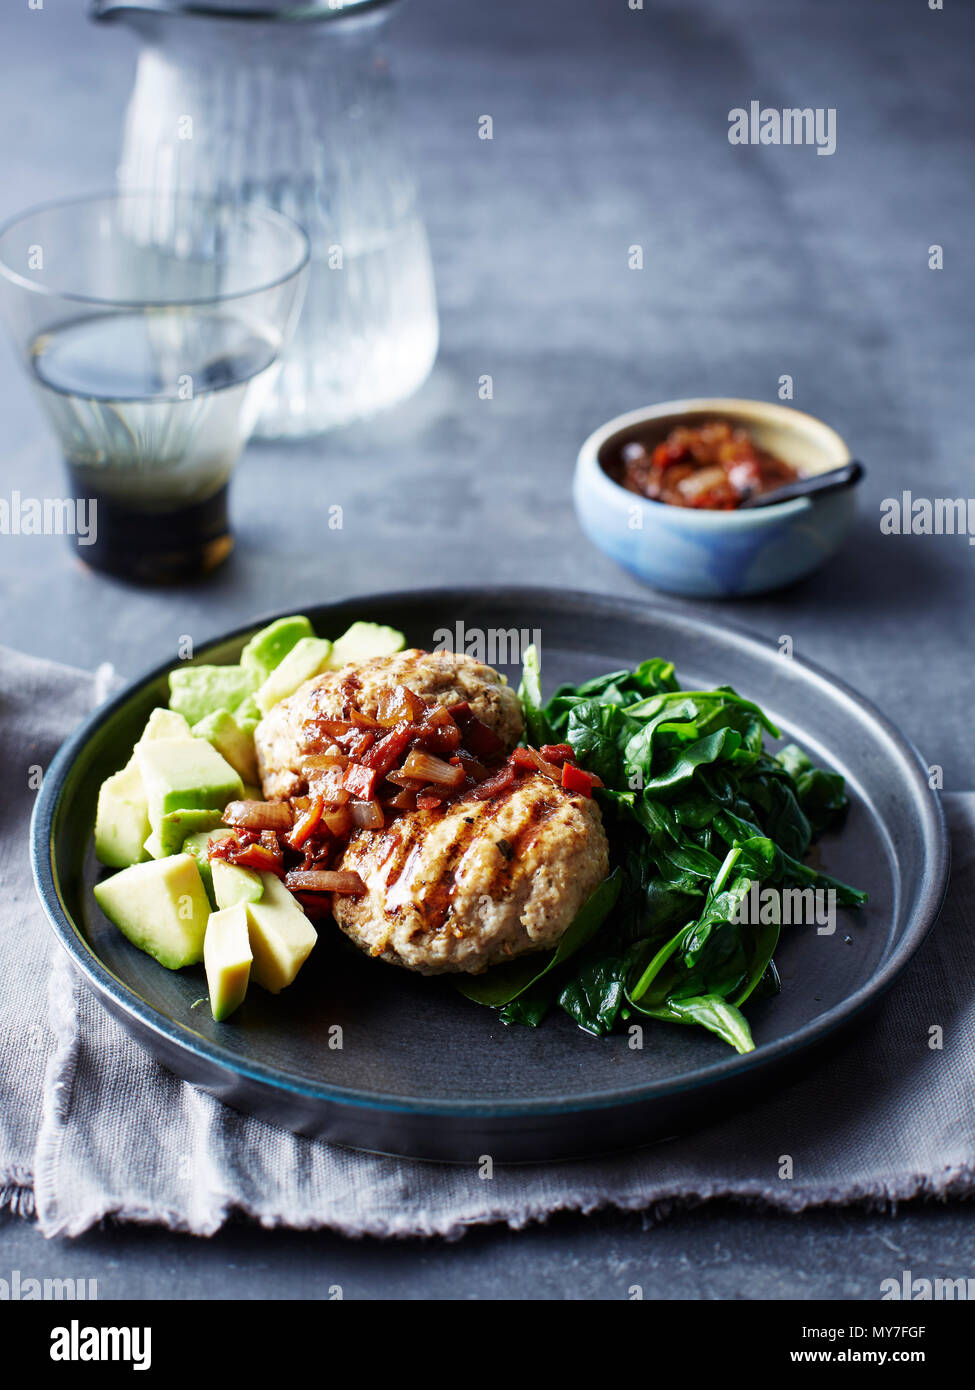 Still life with plate of chicken patty, avocado, onion and chilli jam Stock Photo